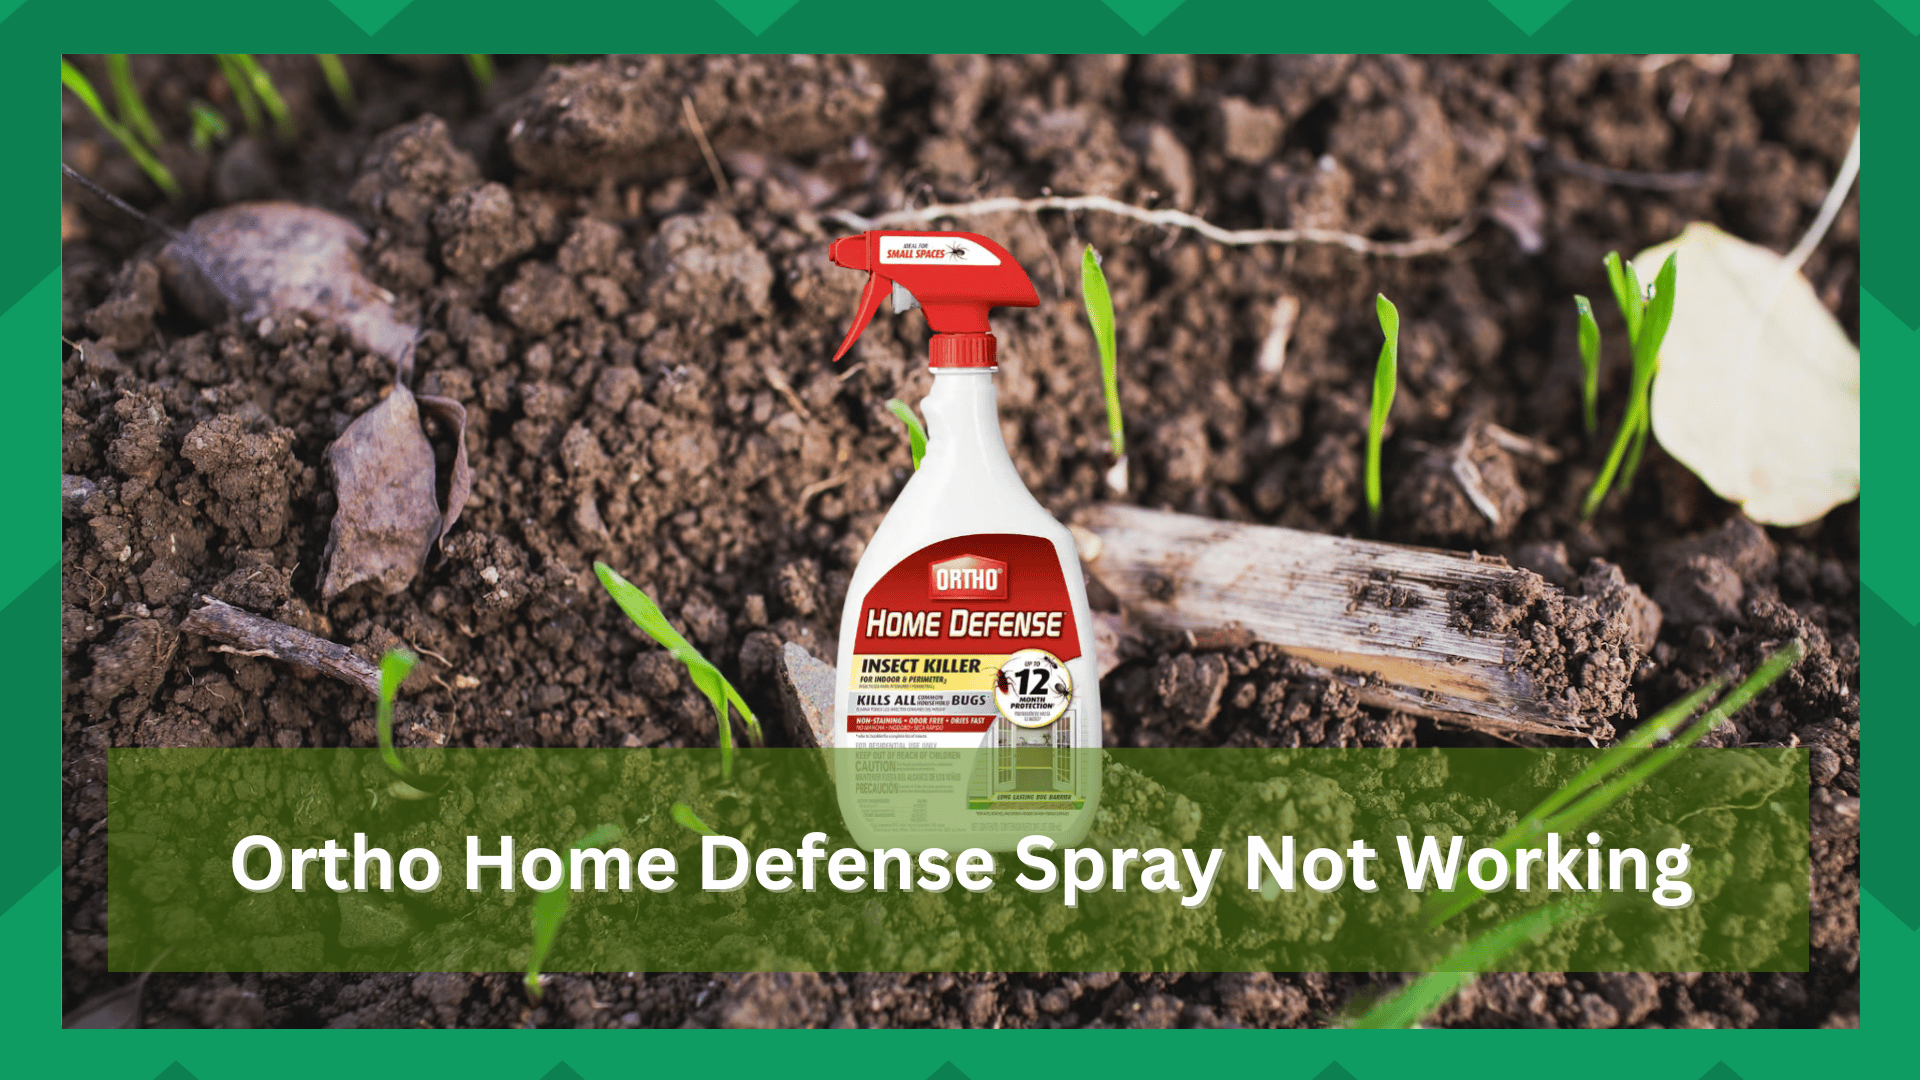 Ortho Home Defense Spray Not Working